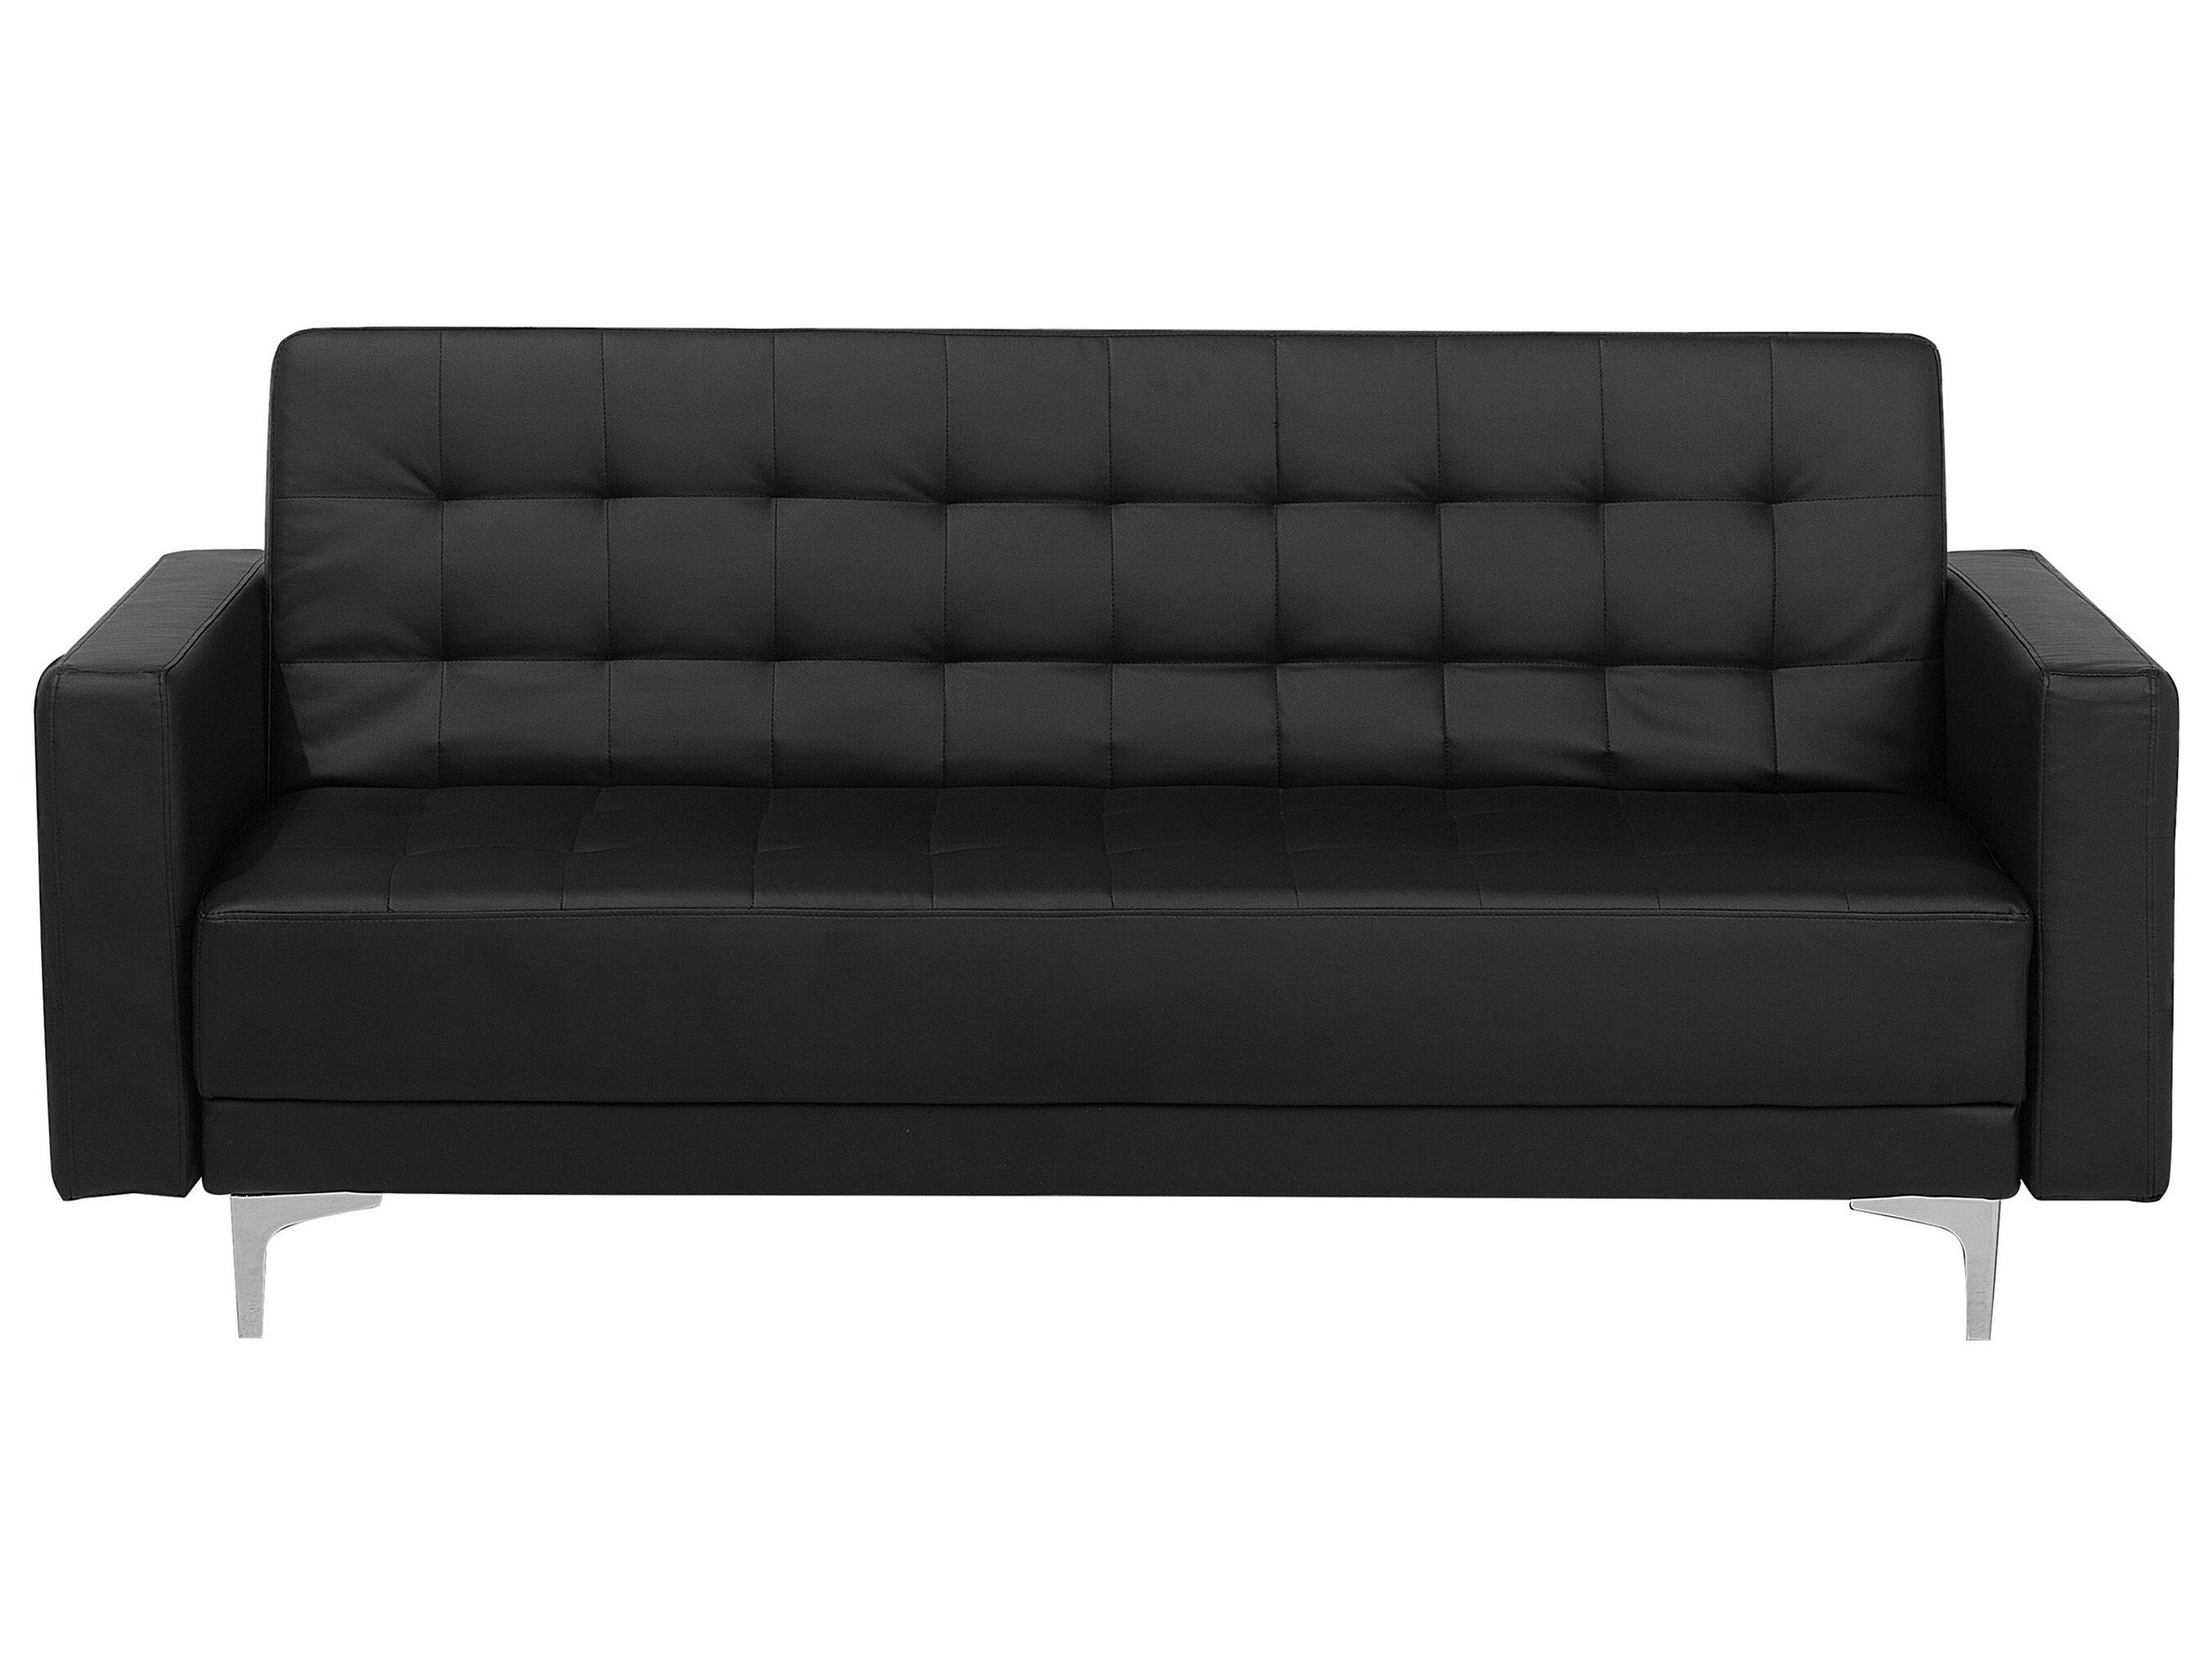 word for sofa bed in french